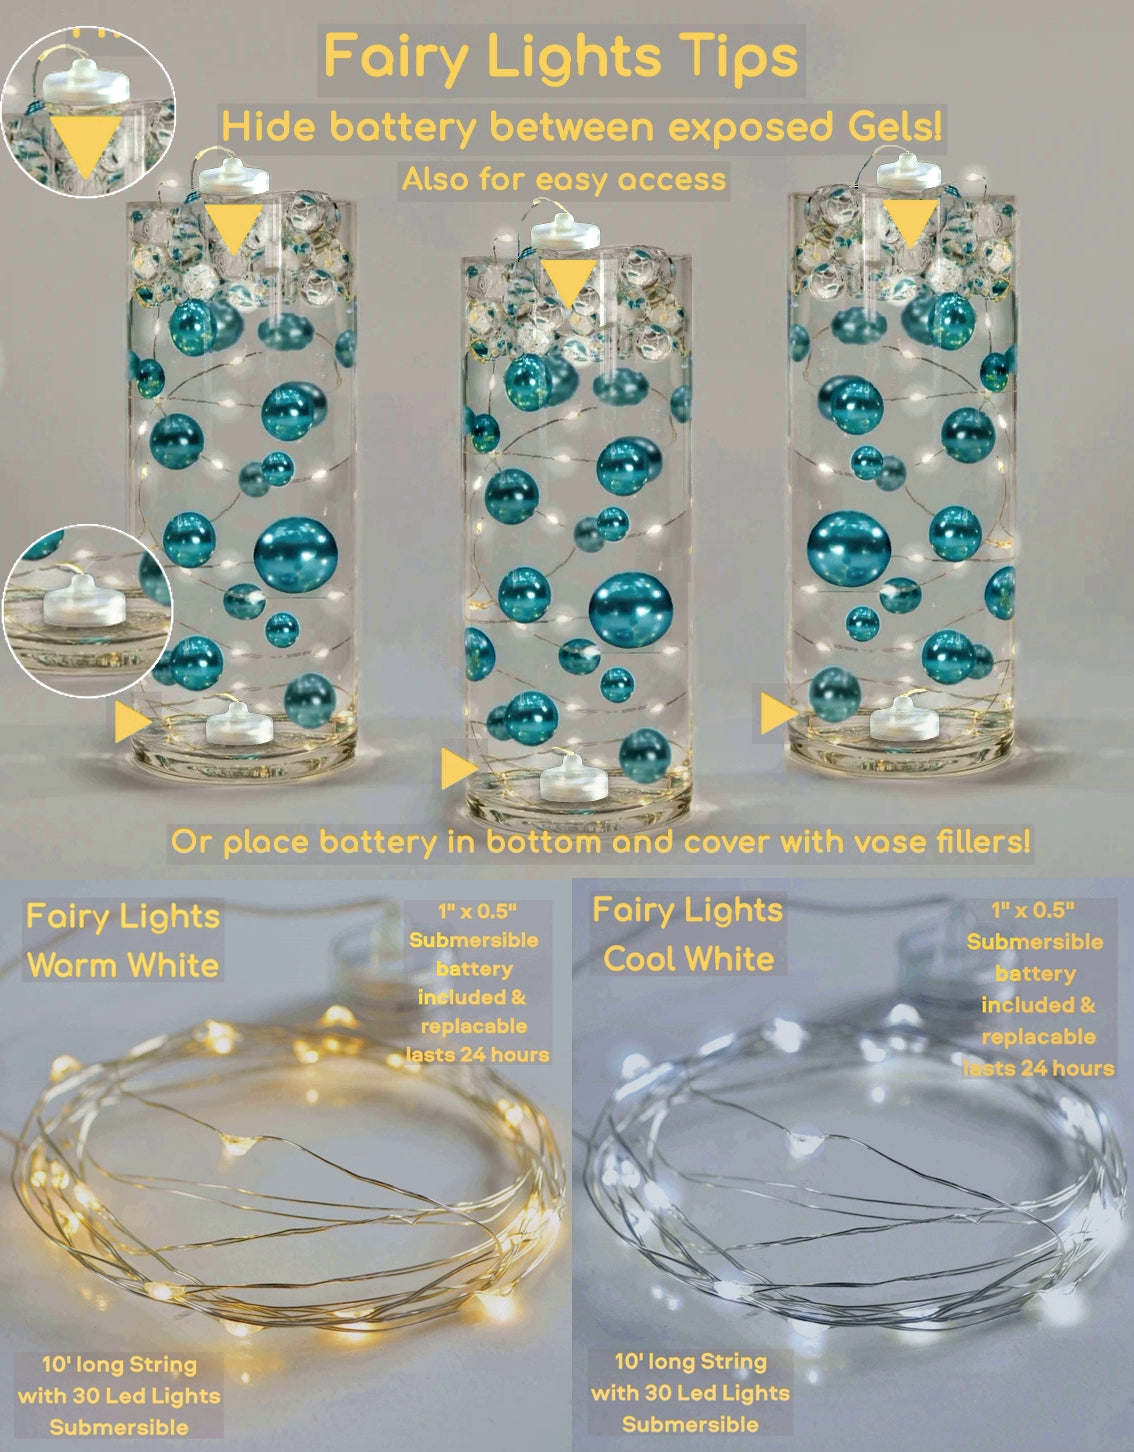 40 Floating Metallic Silver Pearls-No Holes-Fills 1 Gallon of Floating Pearls & Crystal Clear Gels for Floating Effect-With Exclusive Measured Floating Gels Prep Bag- Option: 3 Submersible Fairy Lights Strings